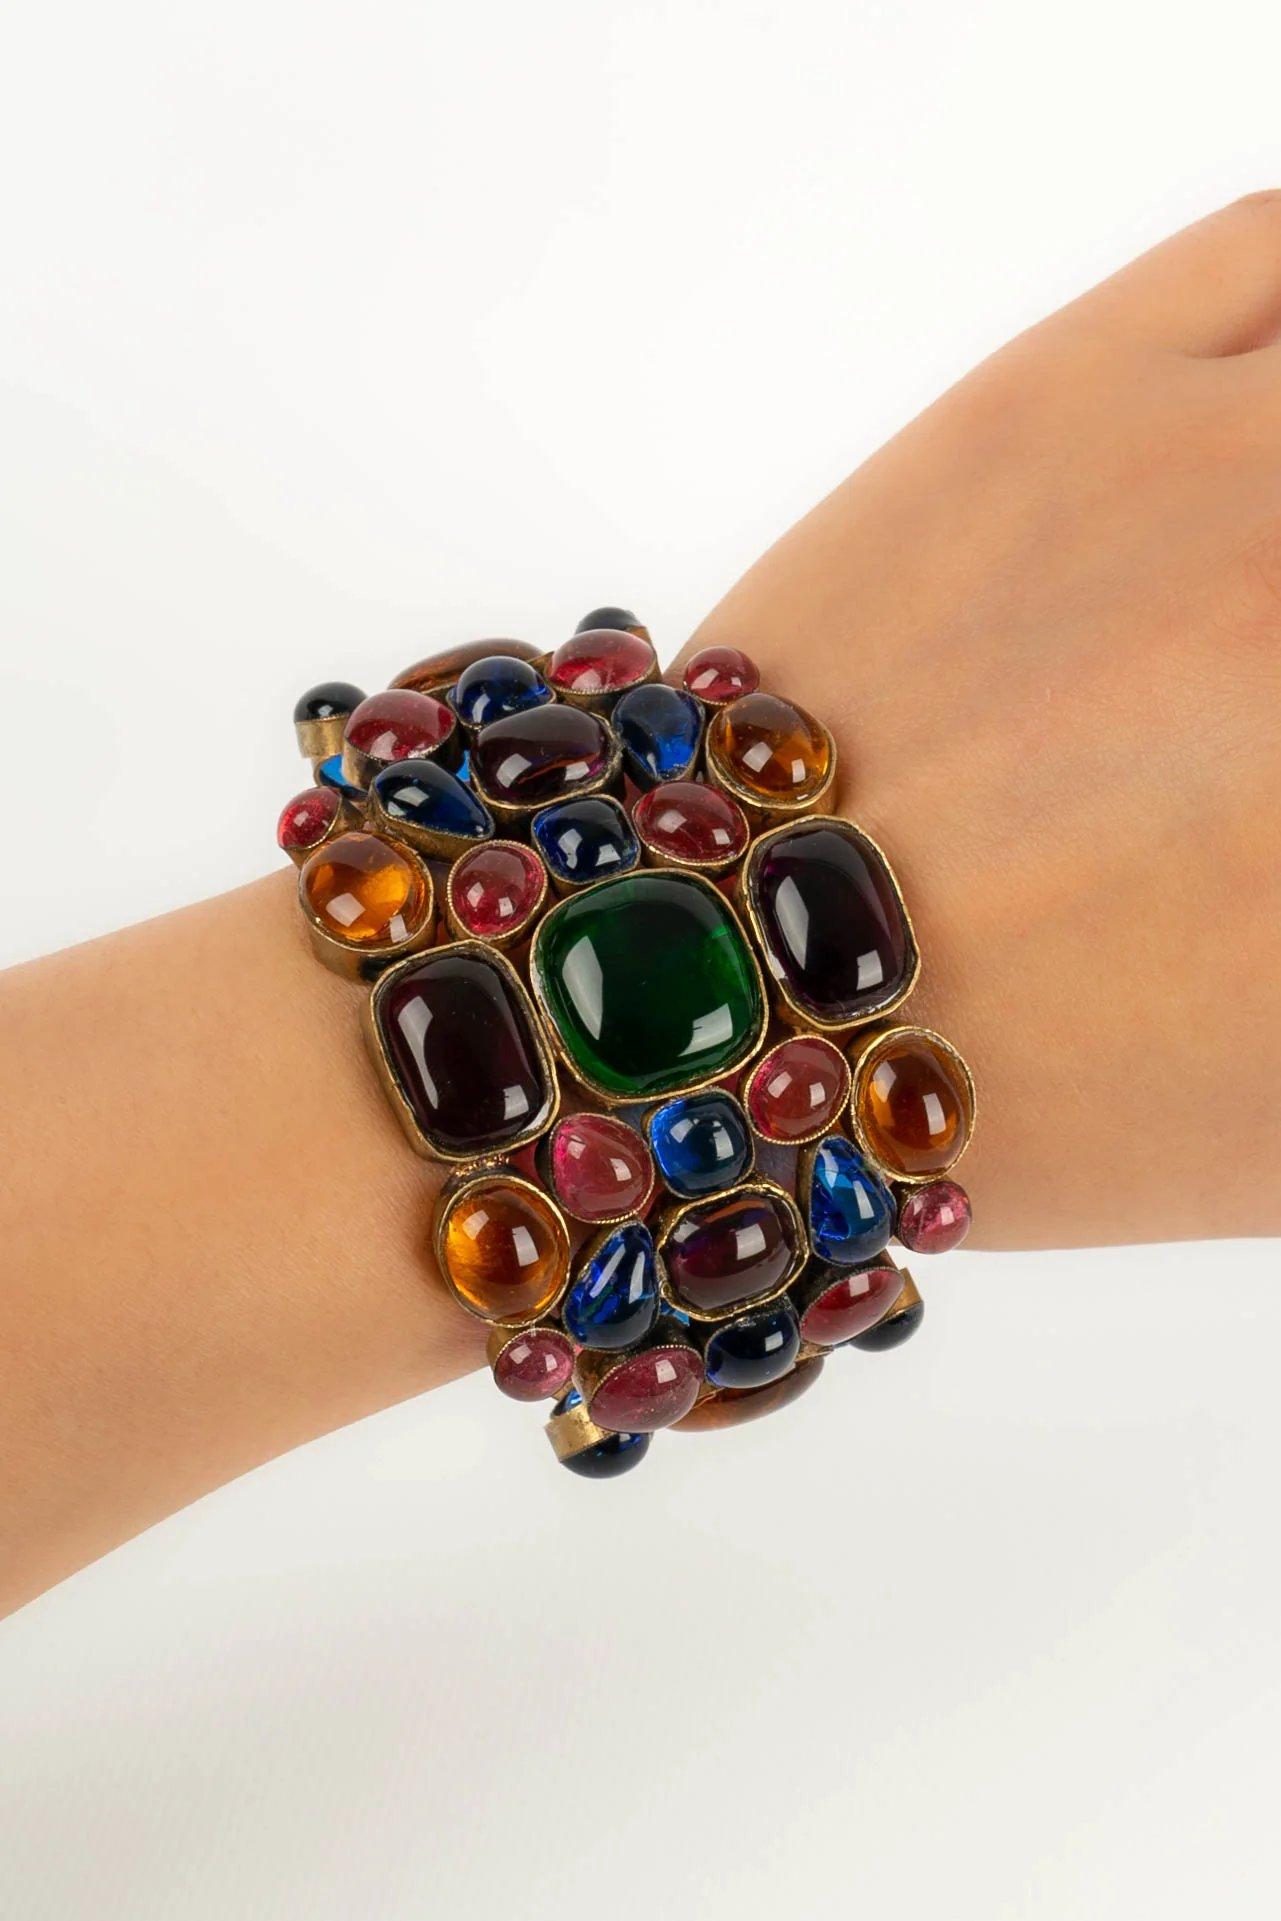 Chanel Dark Gold Metal and Multicolored Glass Paste Bracelet 4